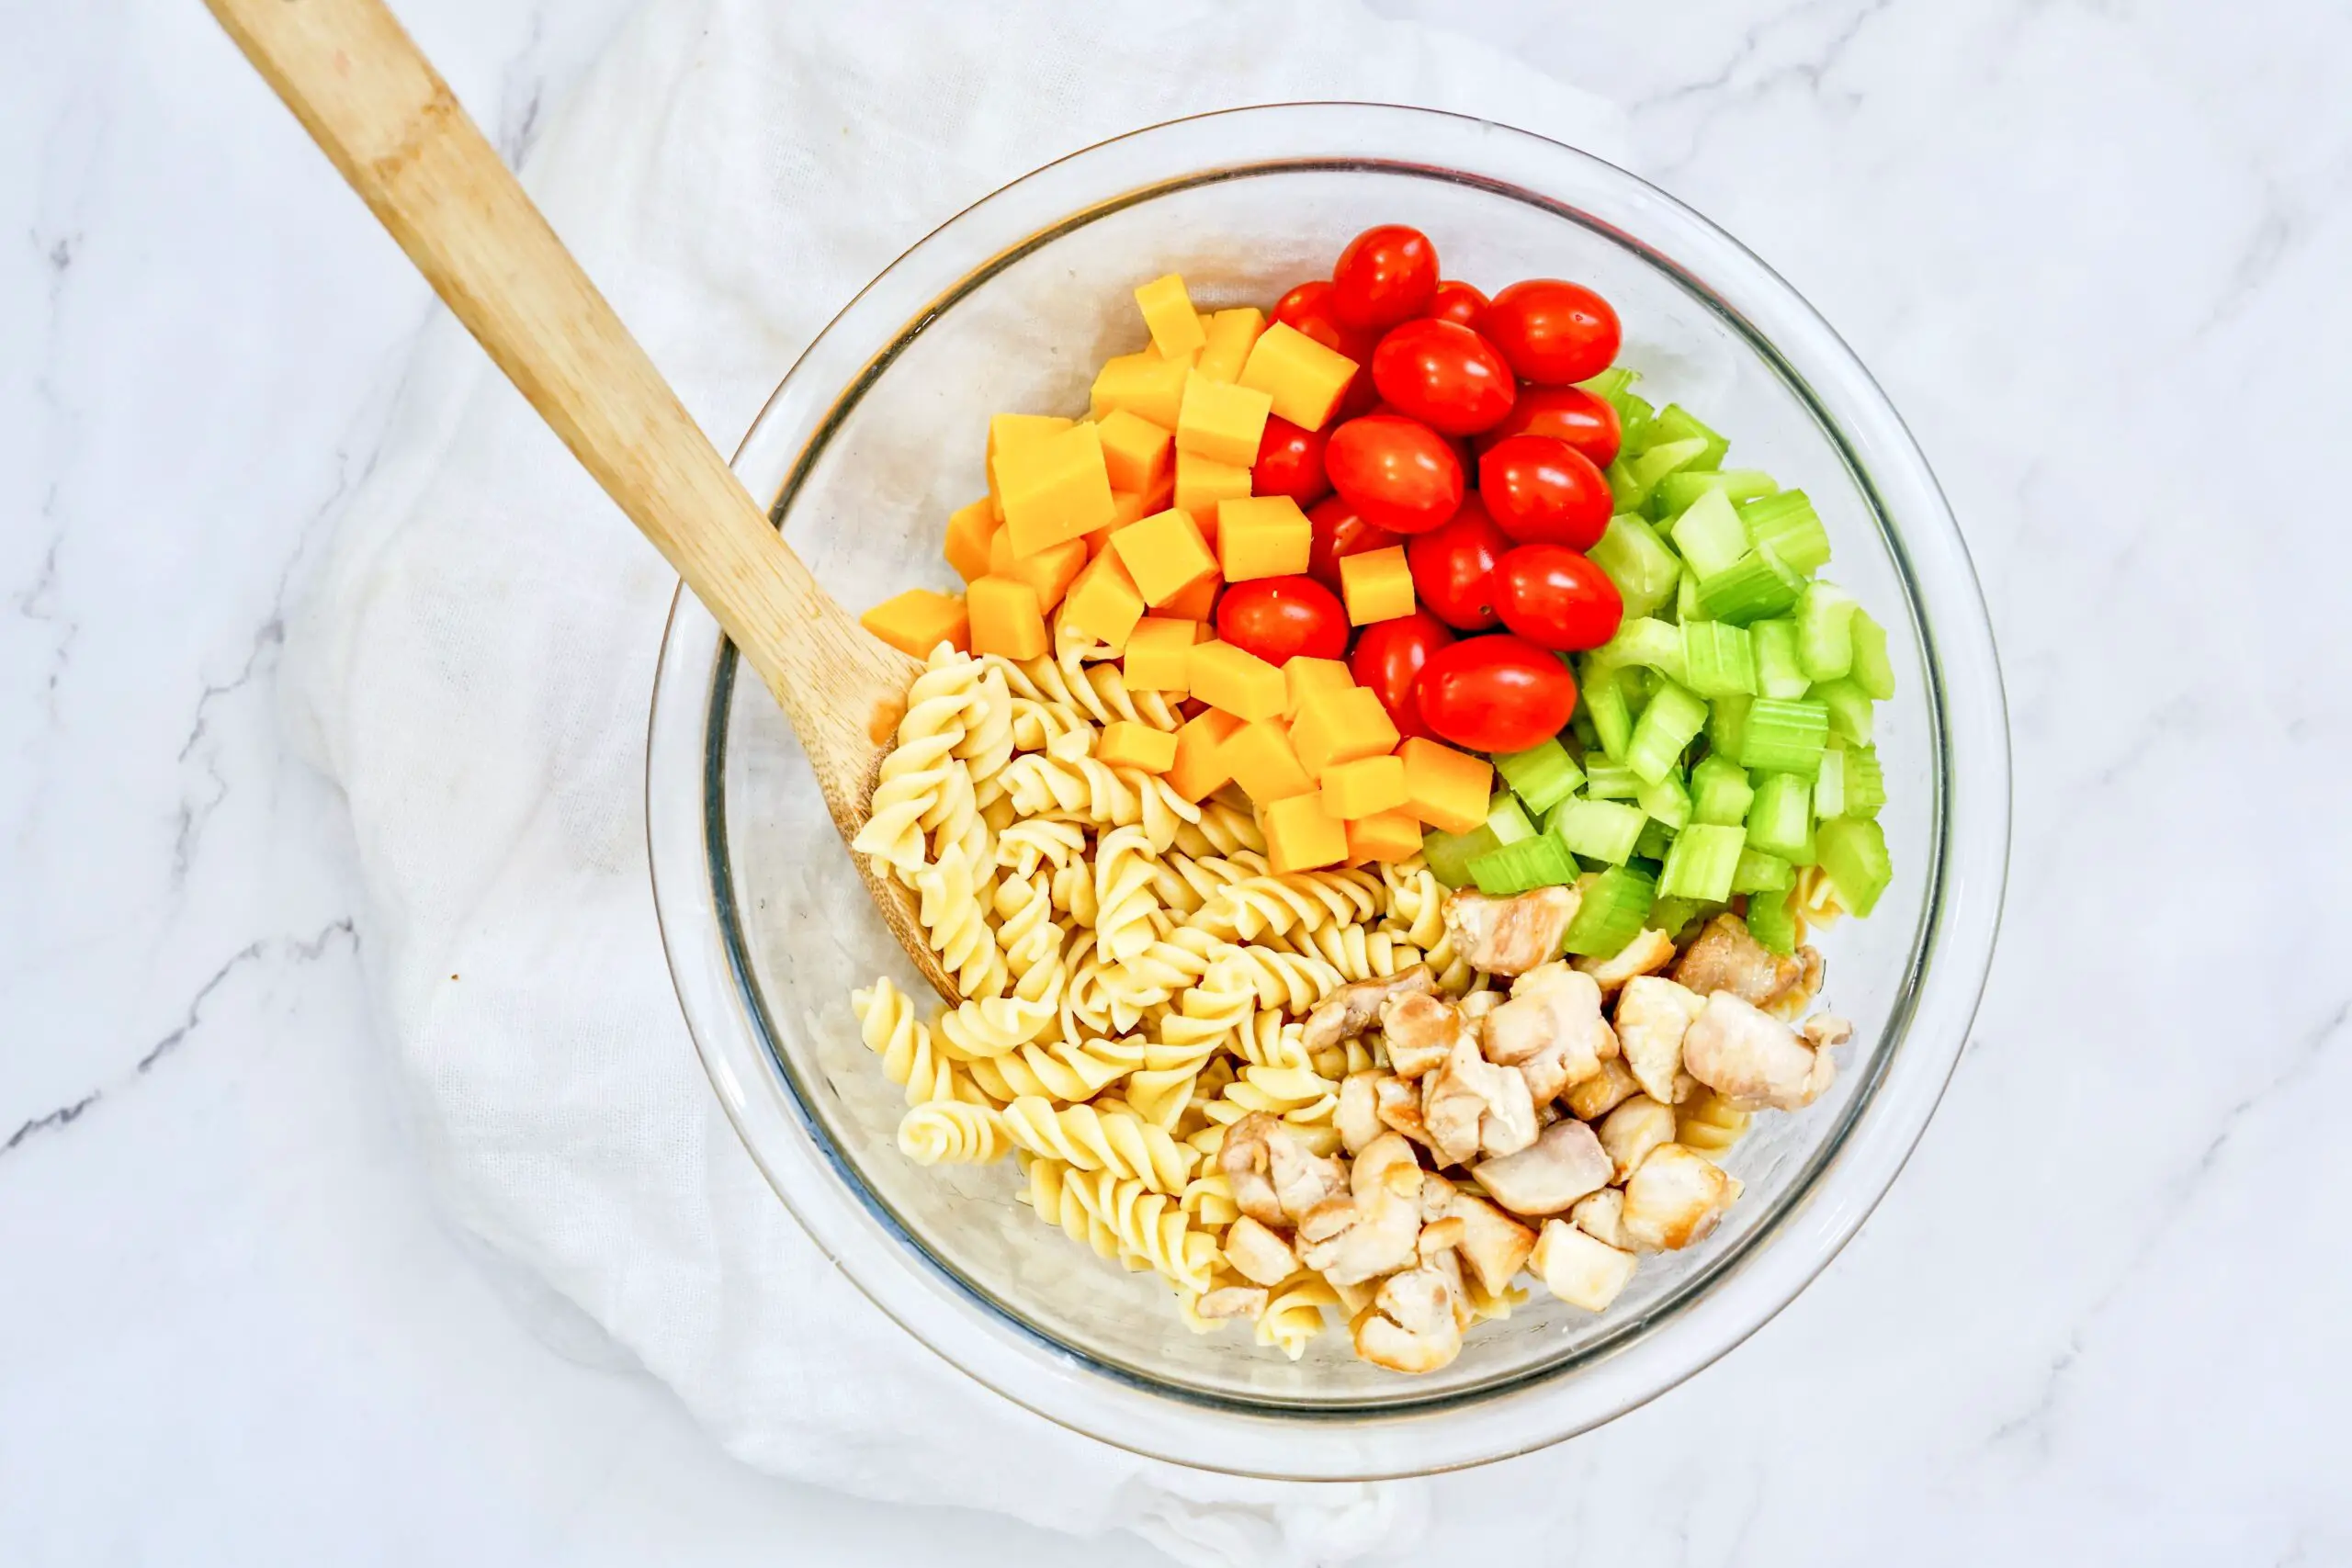 Toss chicken, noodles, cheese, celery, and tomatoes together.